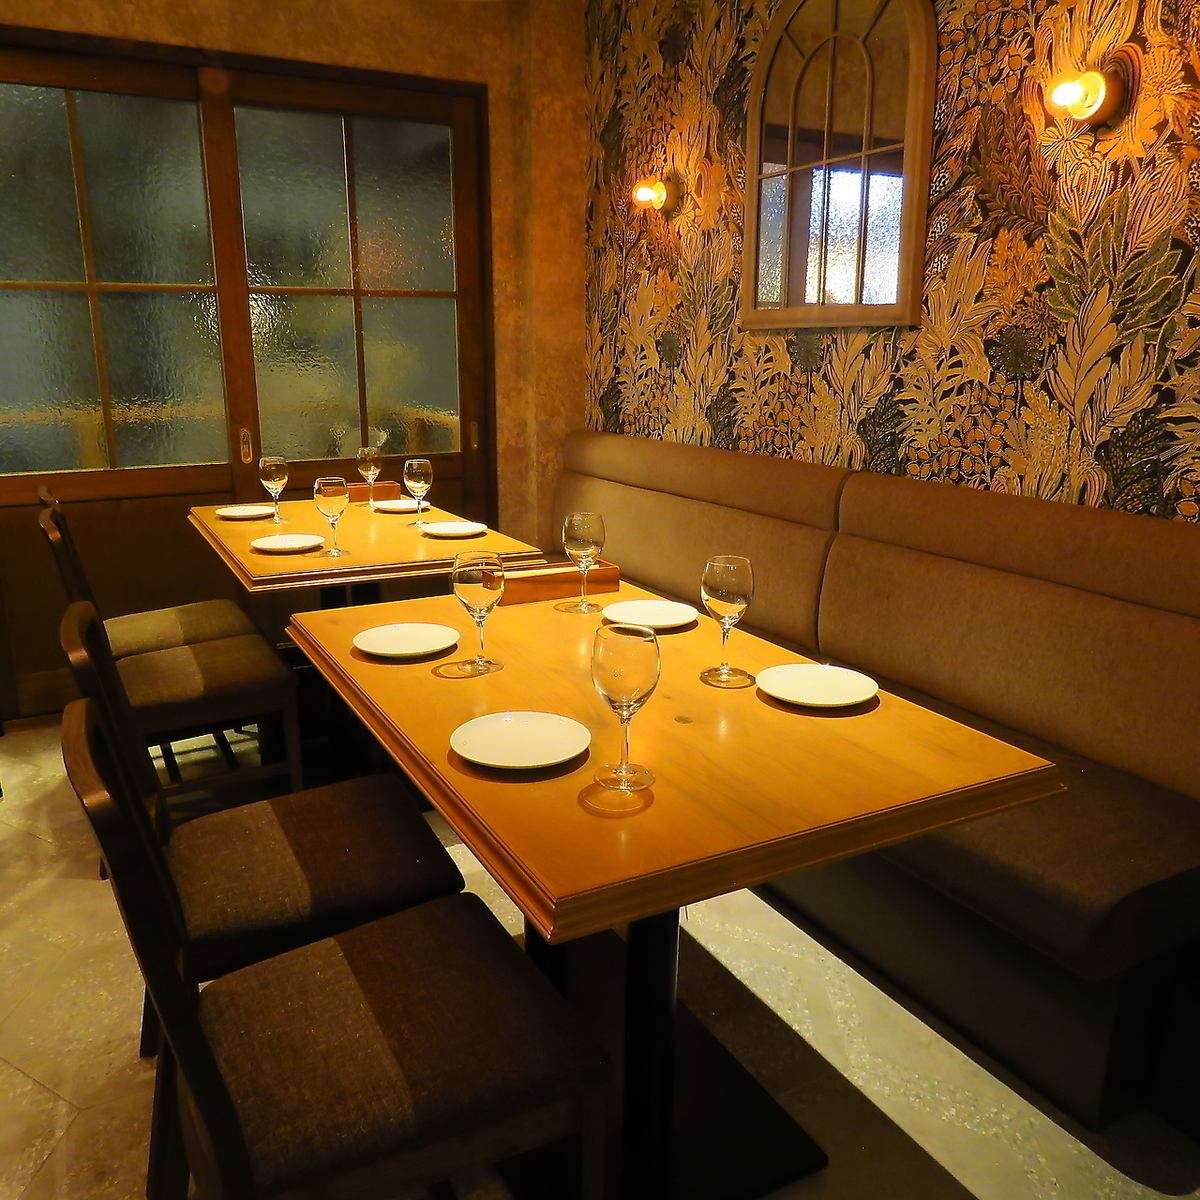 Also available for private reservations for small groups.Please feel free to contact us♪